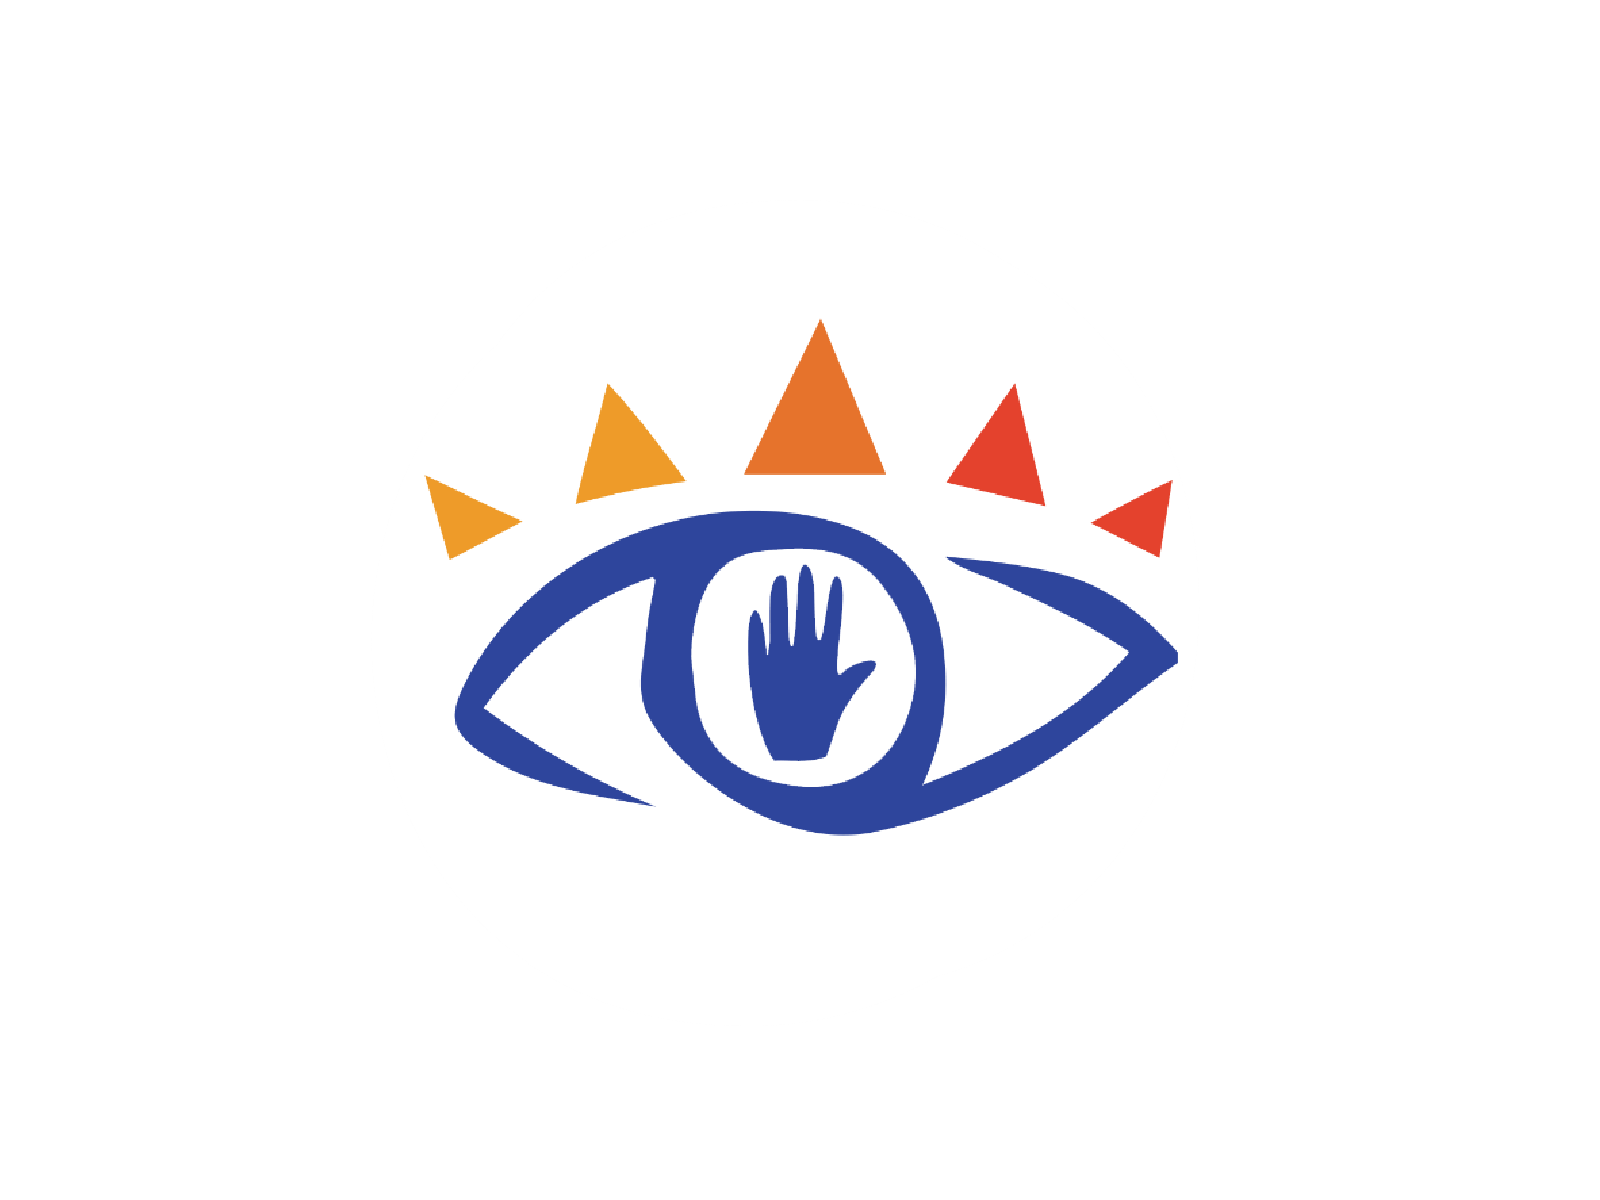 This is the logo for the Freechild Institute for Youth Engagement, https://freechild.org.